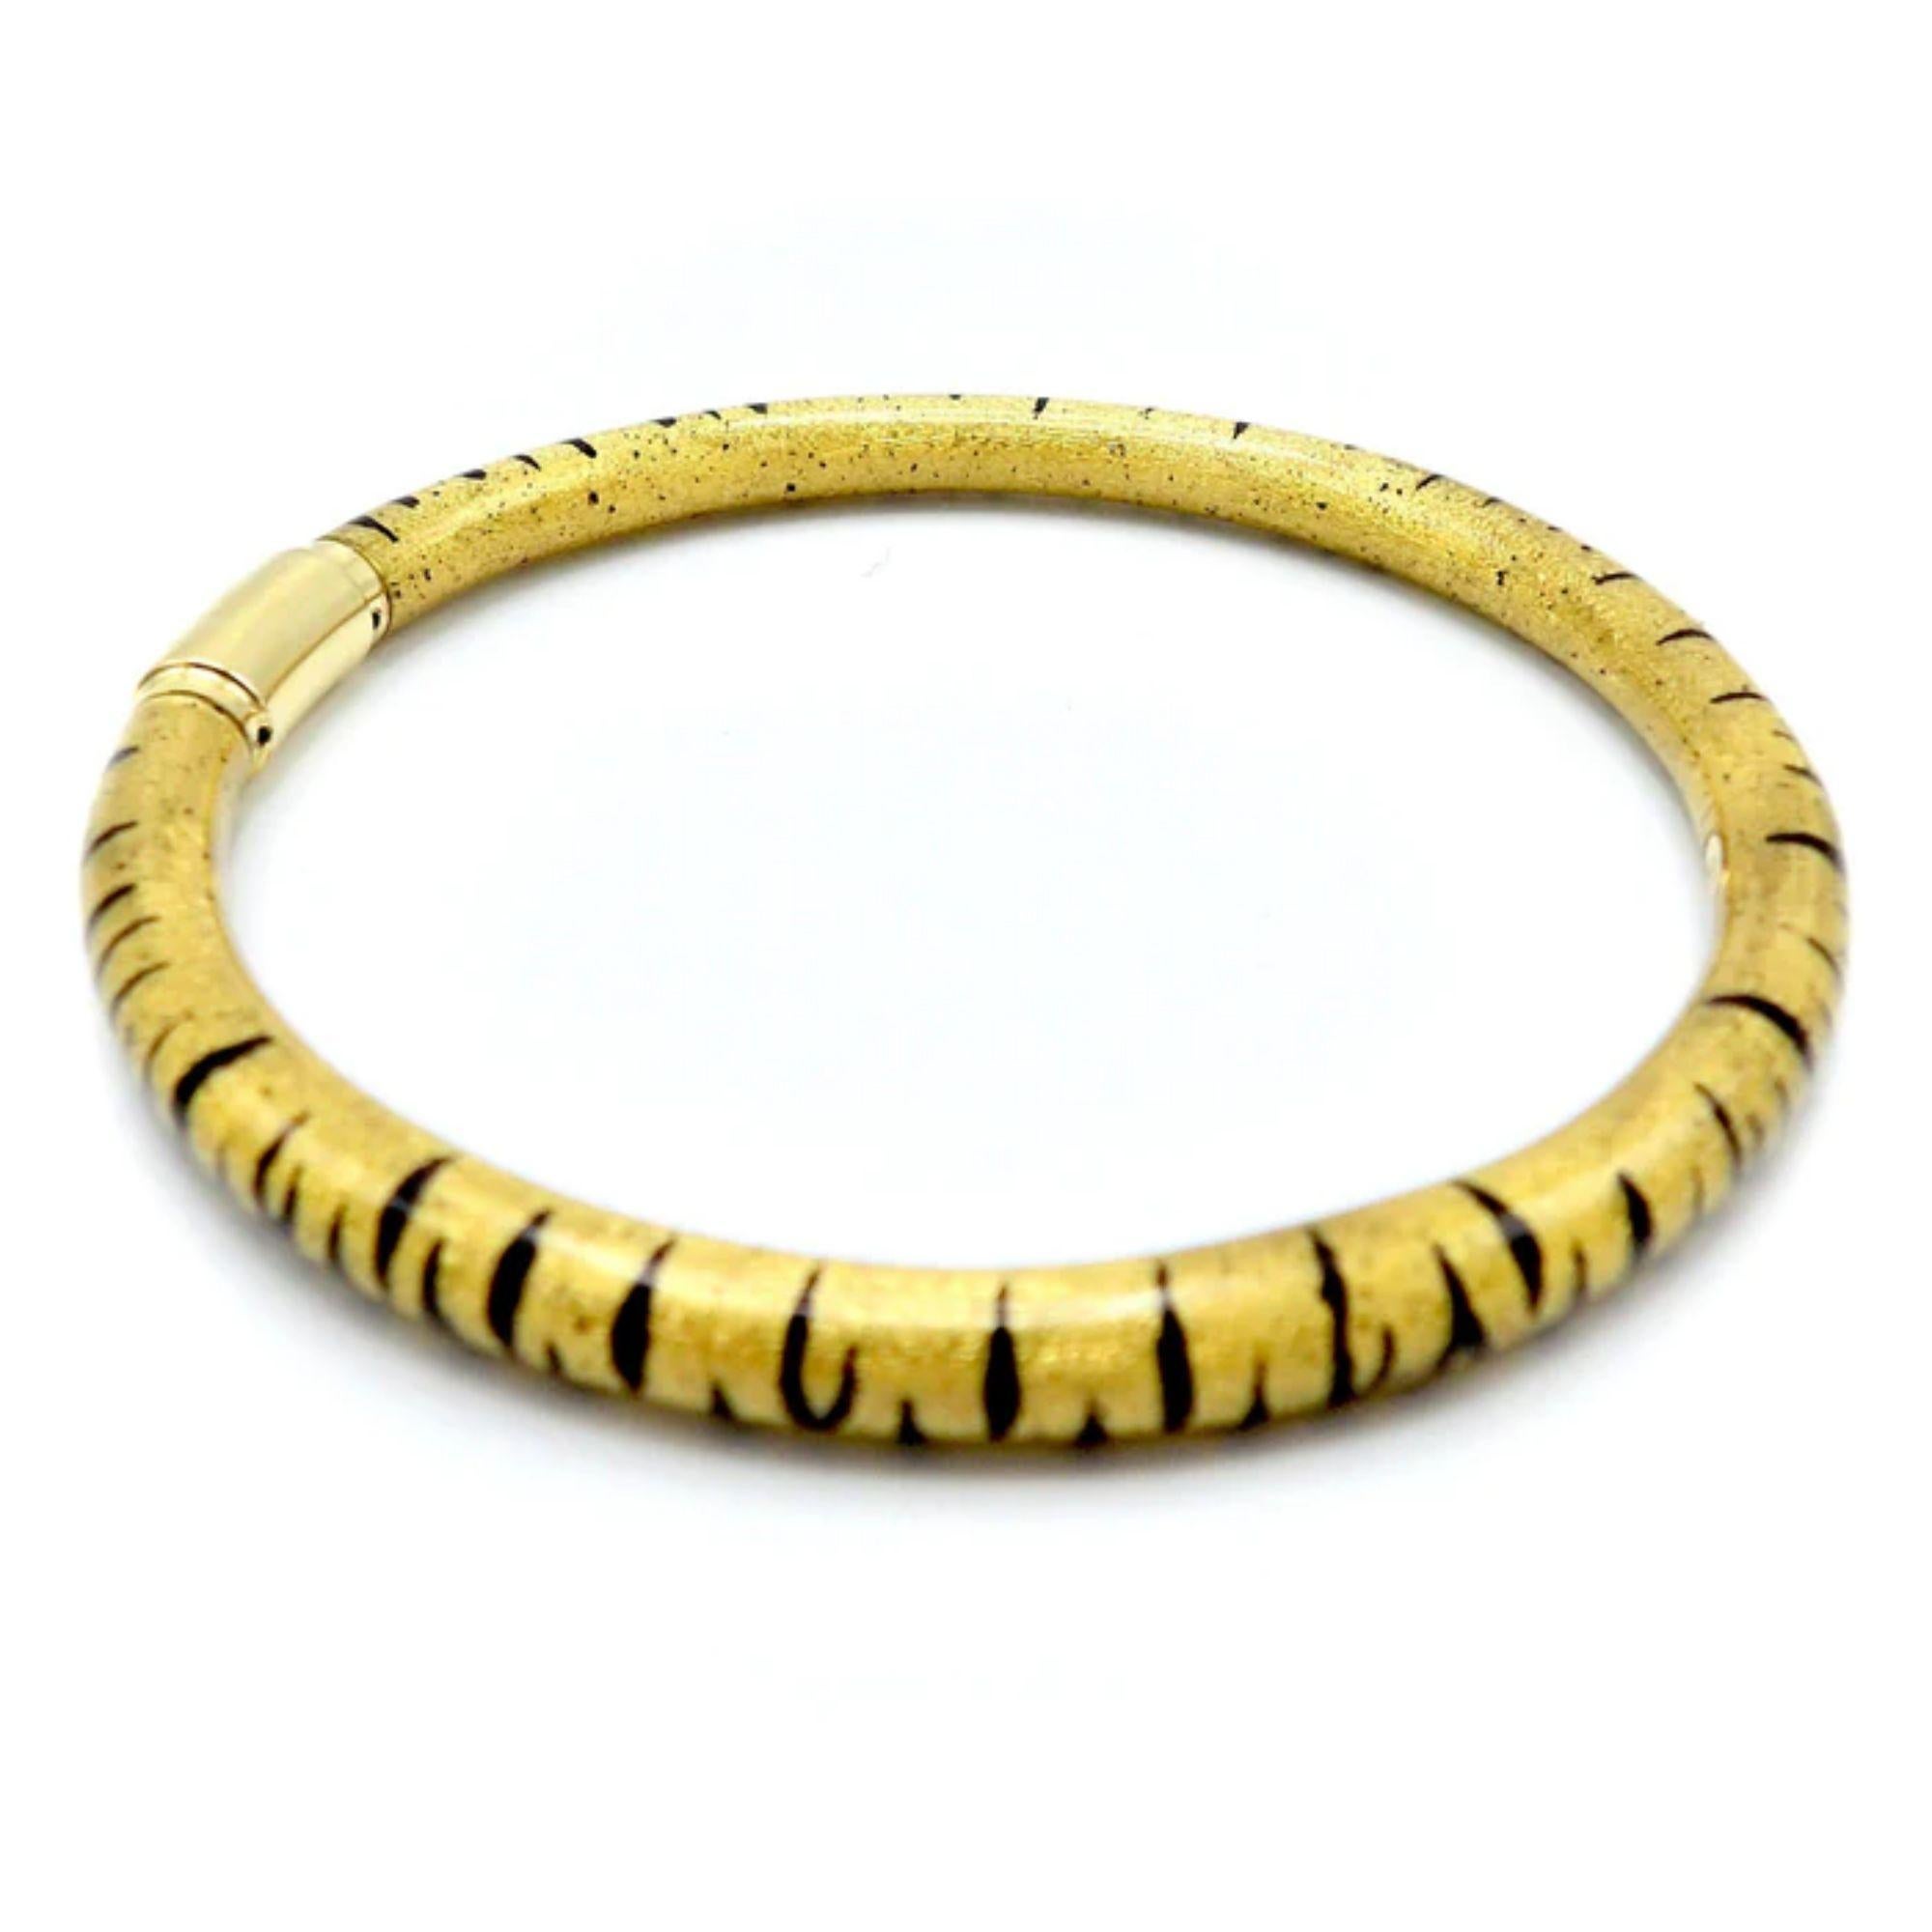 Soho 18K Gold Enamel Tiger Stripe Bangle Bracelet, circa 2010
 
This gorgeous SOHO Enamel Bangle Bracelet was handcrafted in Italy circa 2010 in a beautiful gold enamel with a tiger stripe motif. SOHO Jewelry combines modern elegance with the age